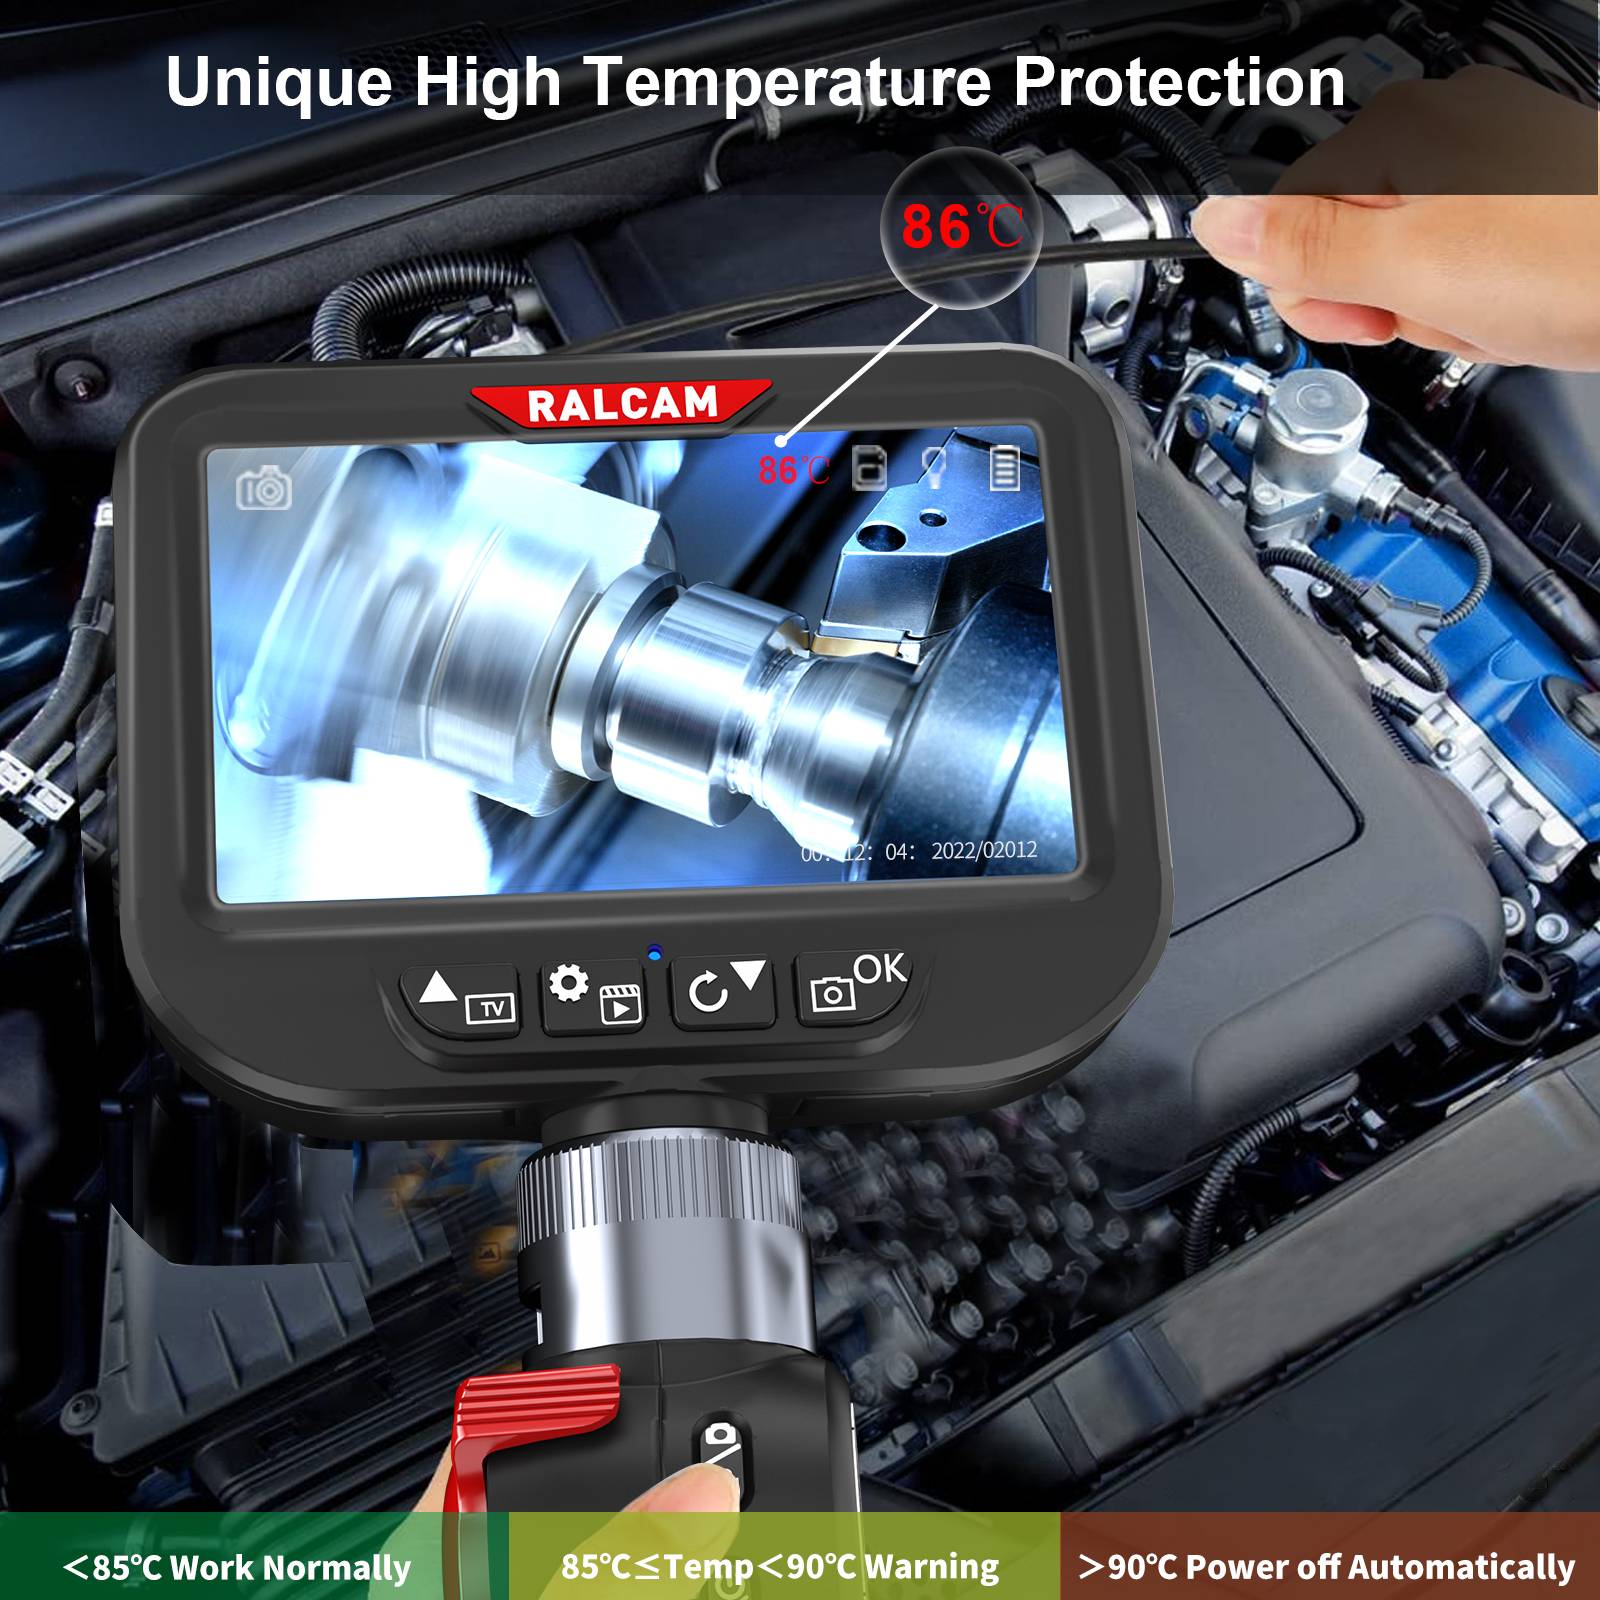 The importance of General Tools Borescope